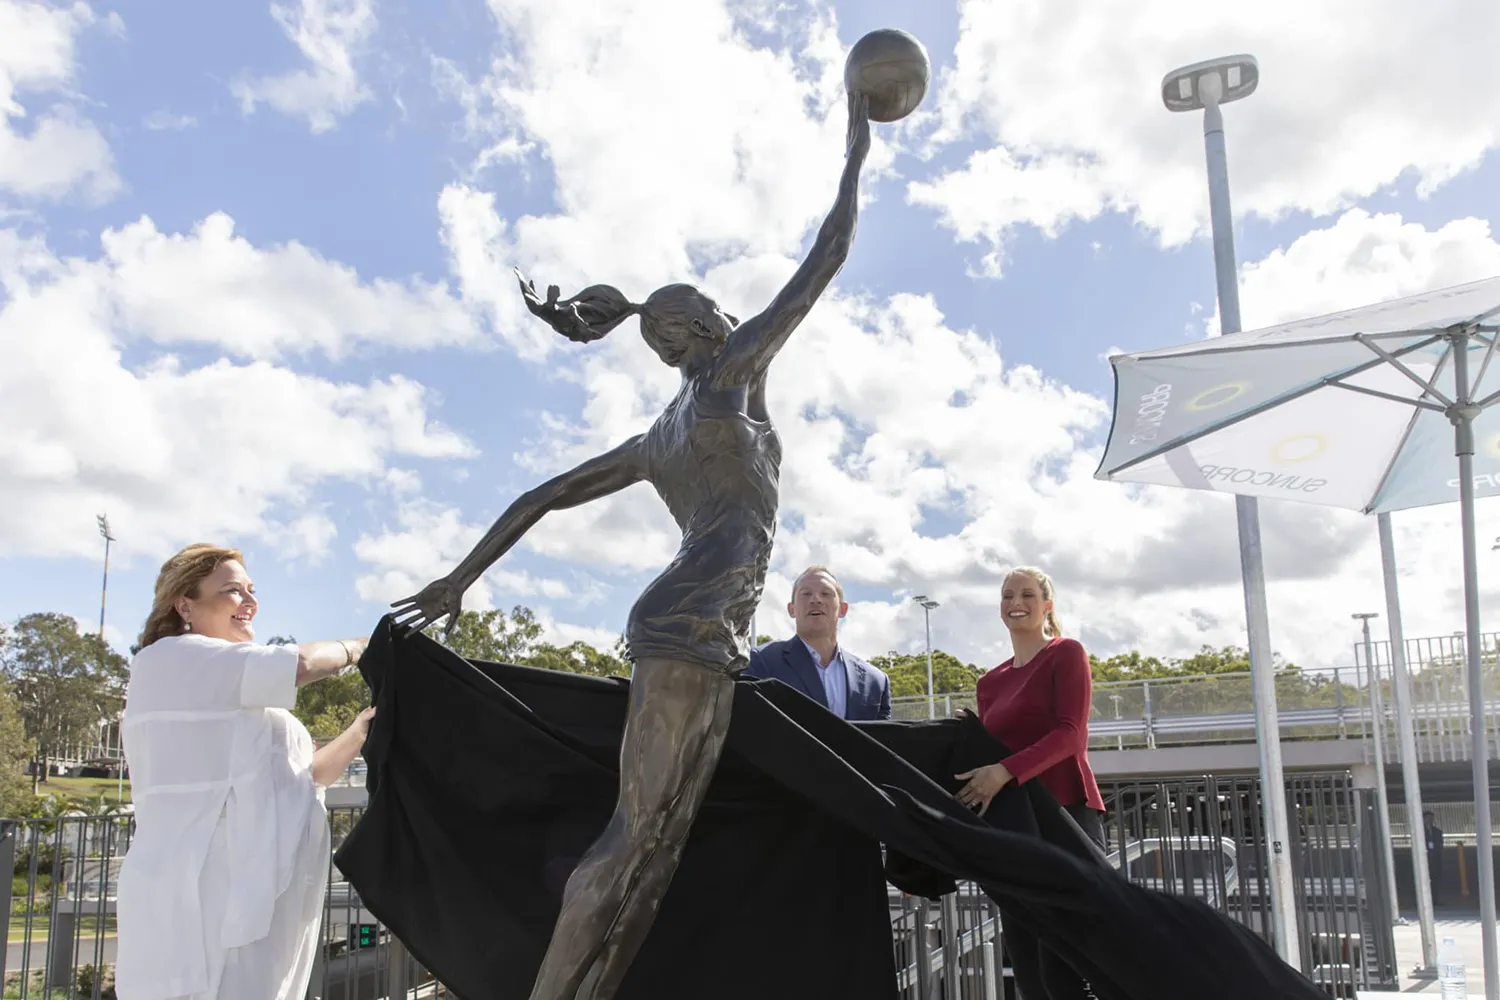 Laura Geitz's bronze statue being unveiled, with a proud backdrop of a clear sky